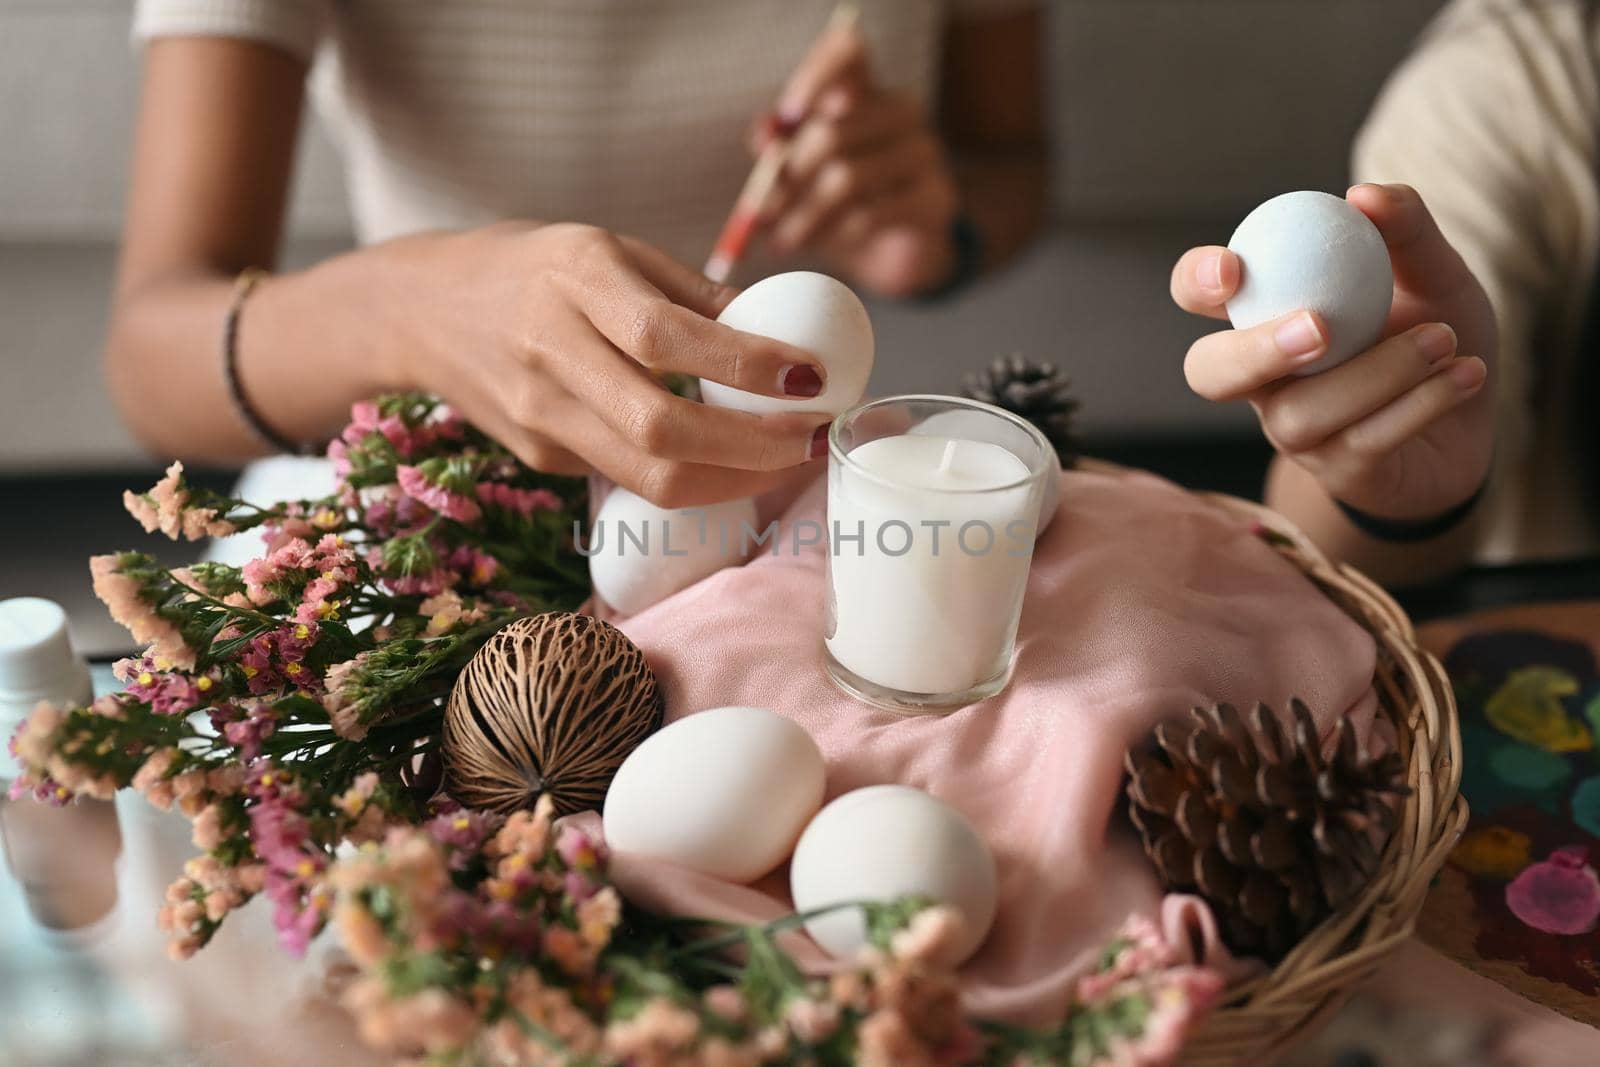 Mother and daughter are arranging Easter eggs into wicker basket and preparing for Easter celebration.